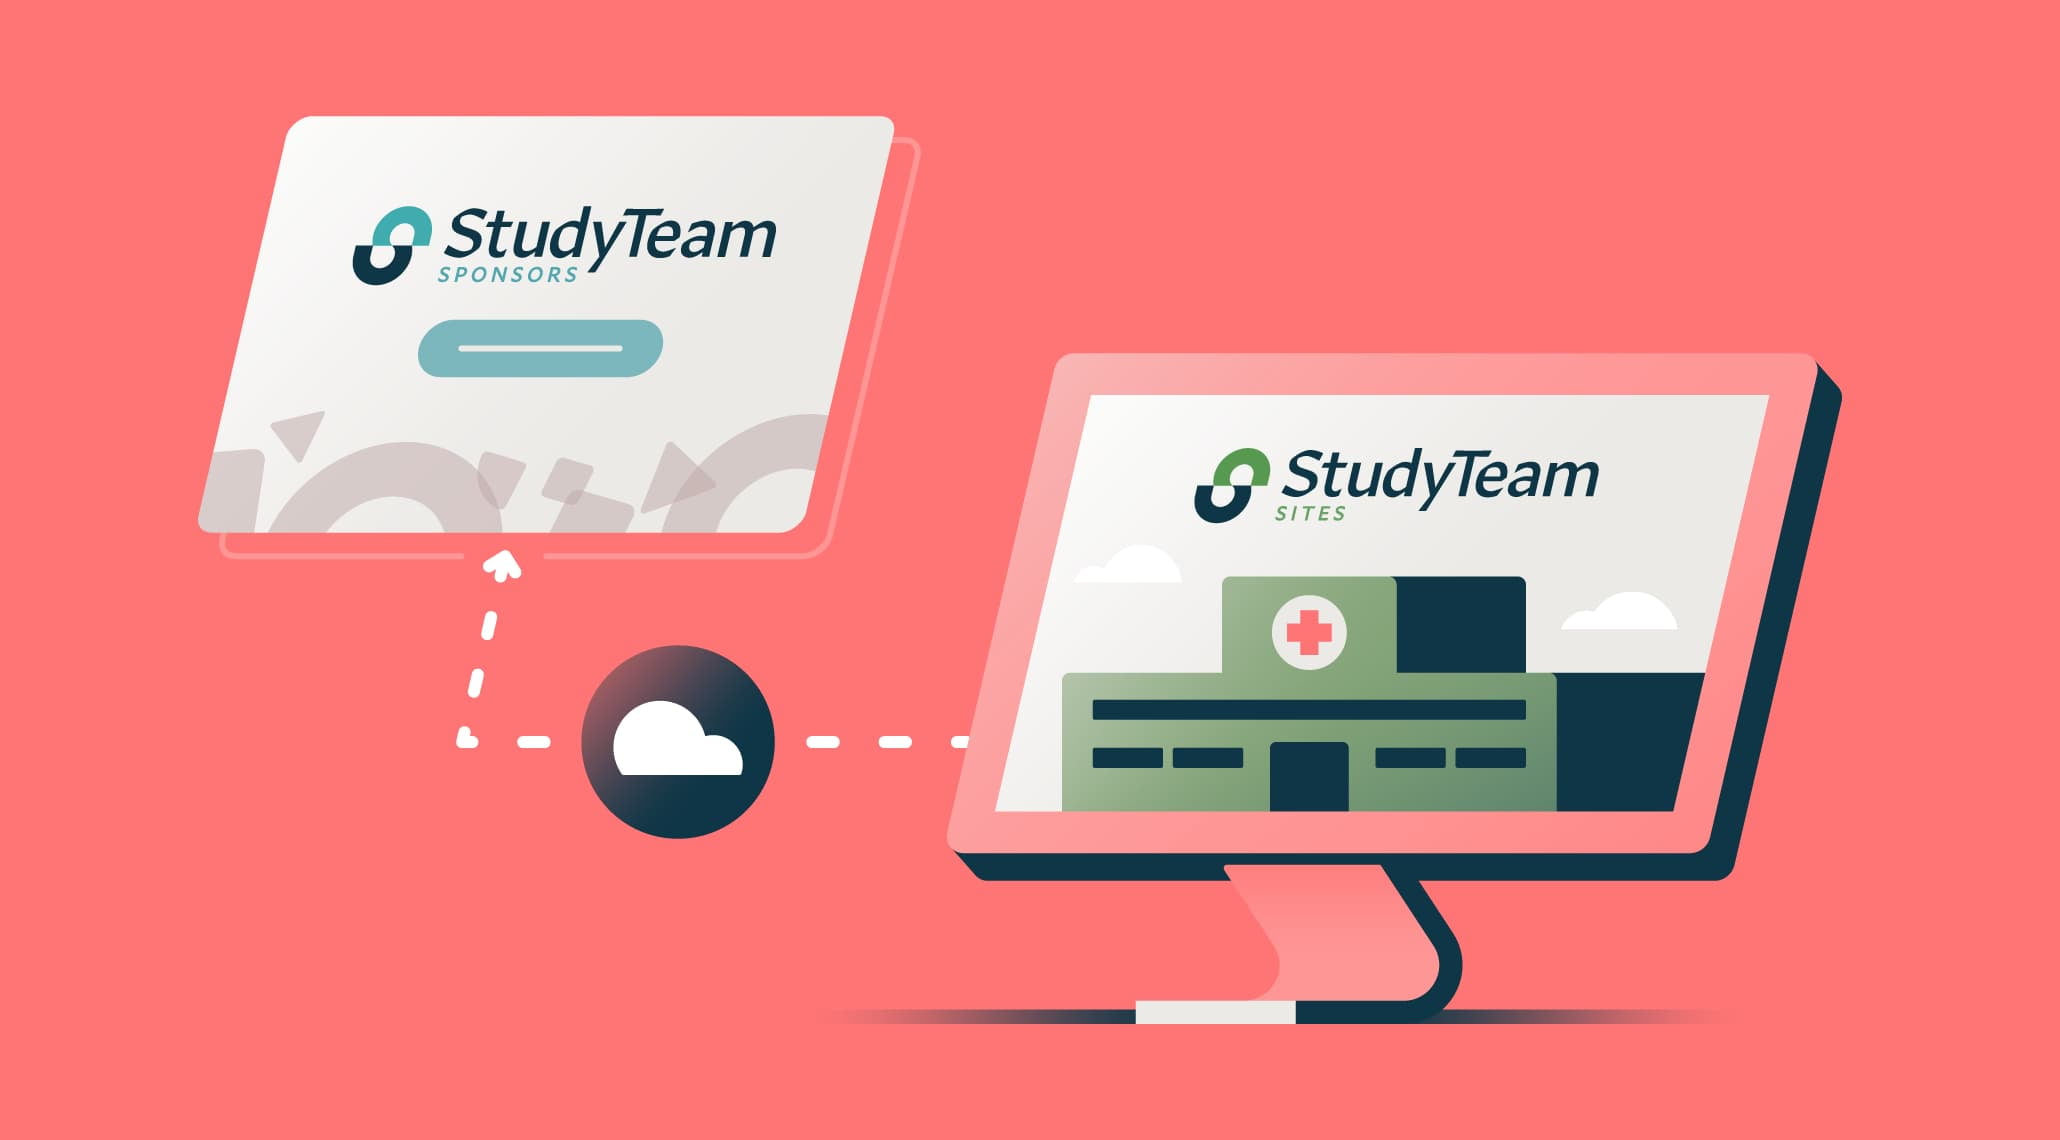 Does StudyTeam Help with Trial Enrollment? 6 Common Questions Answered